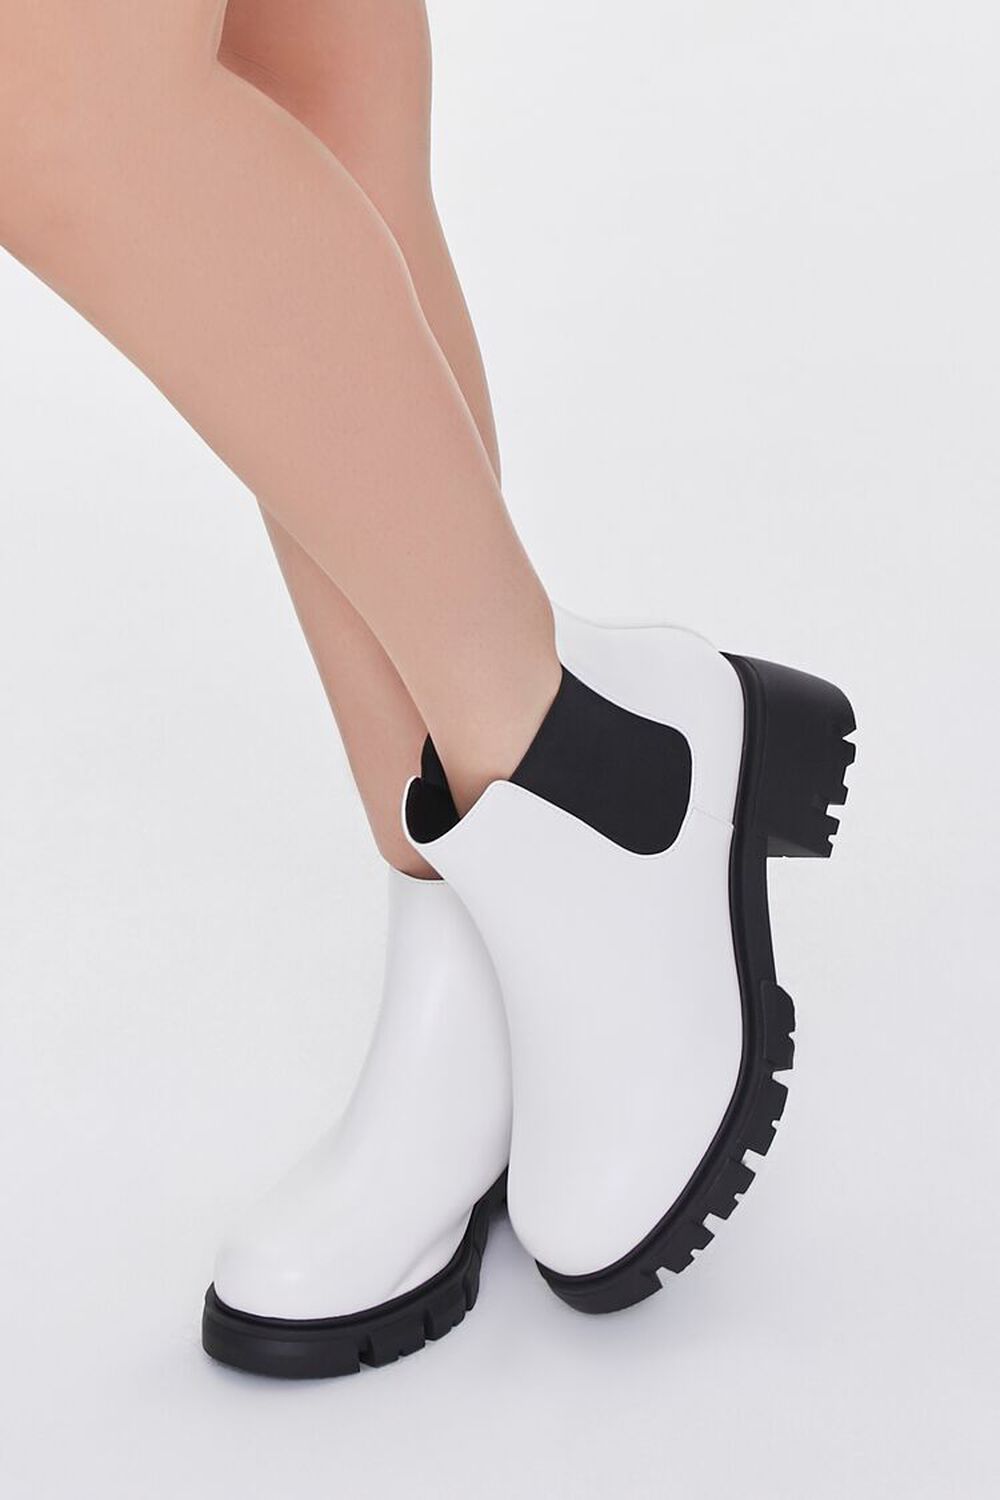 WHITE Faux Leather Chelsea Booties (Wide), image 1